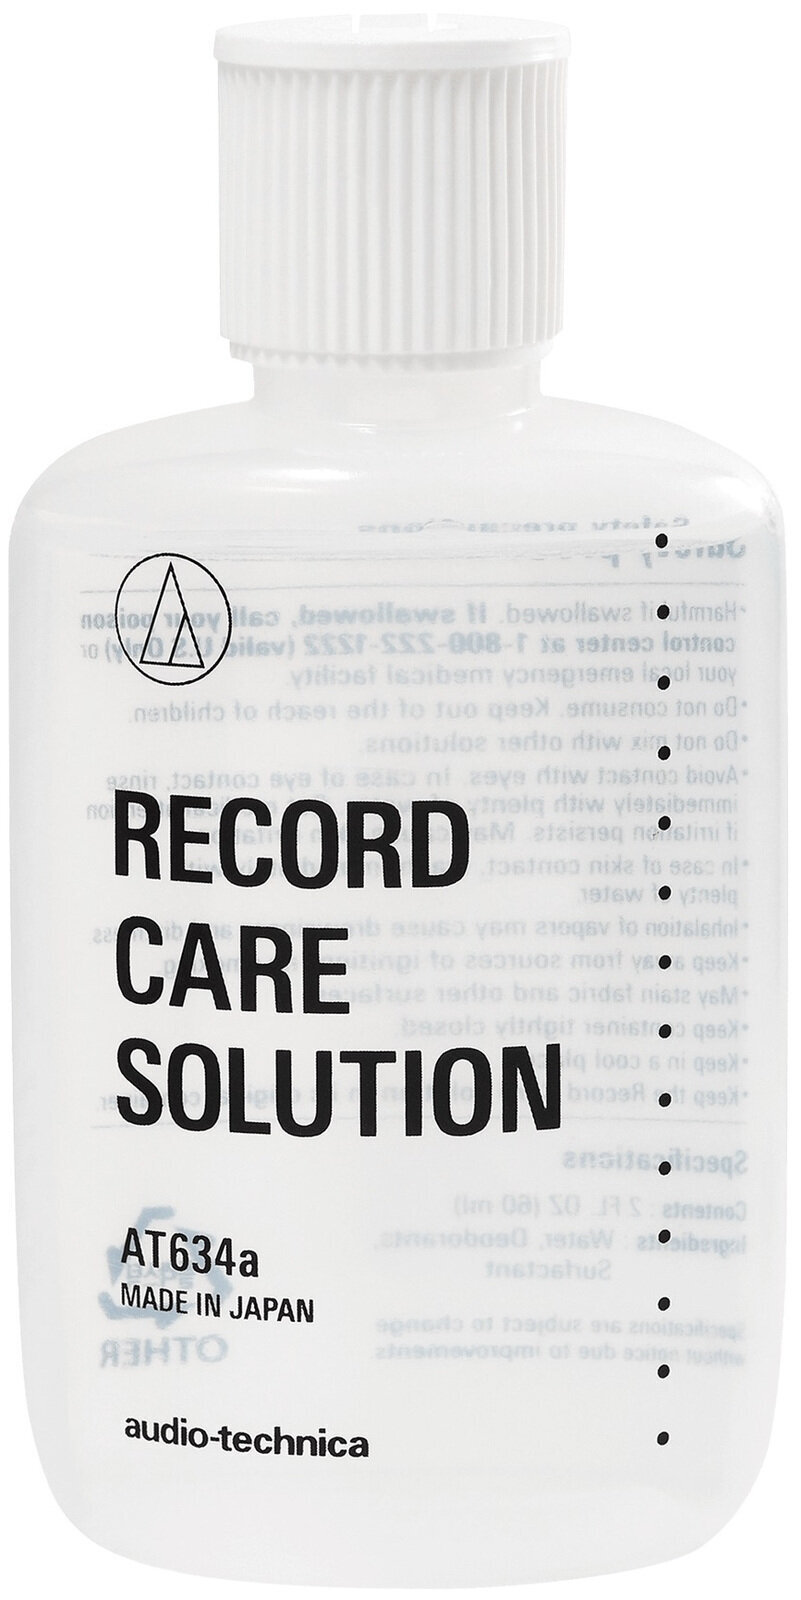 Cleaning agent for LP records Audio-Technica AT634a